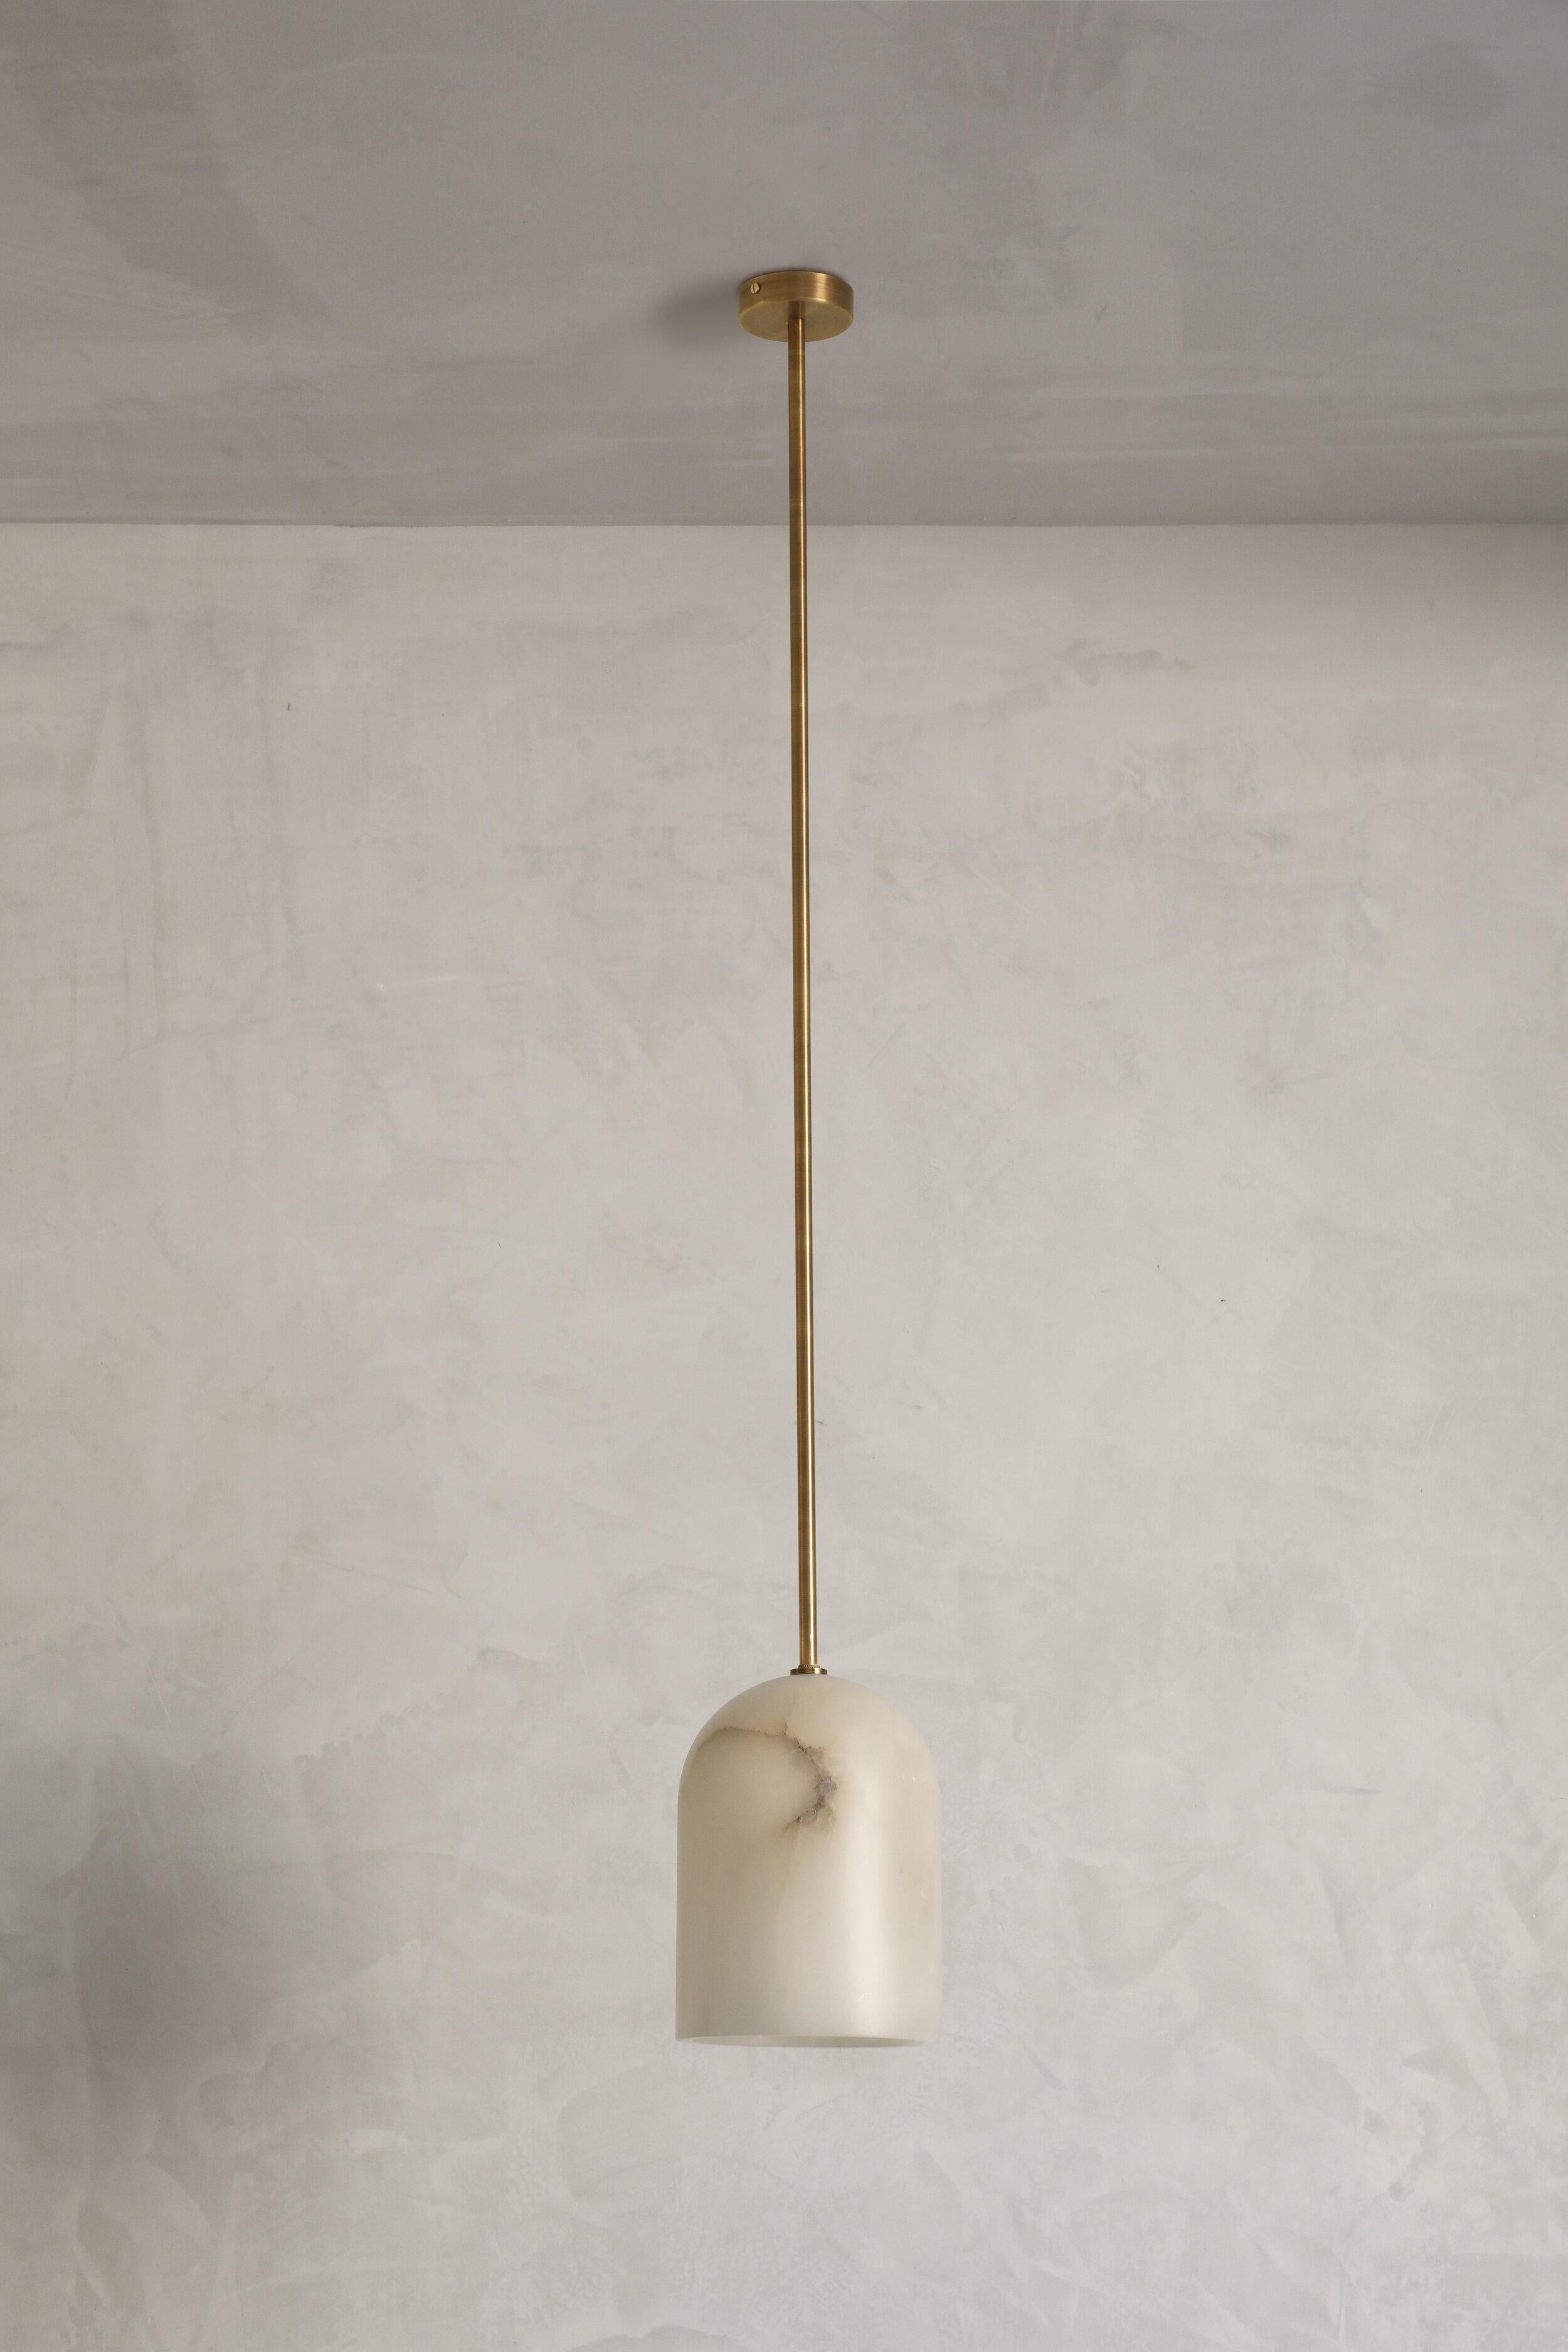 Belfry Alabaster tube 28 pendant by Contain
Dimensions: D28 x H22 cm
Materials: brass structure and alabaster stone
Also available in different finishes and dimensions.

All our lamps can be wired according to each country. If sold to the USA